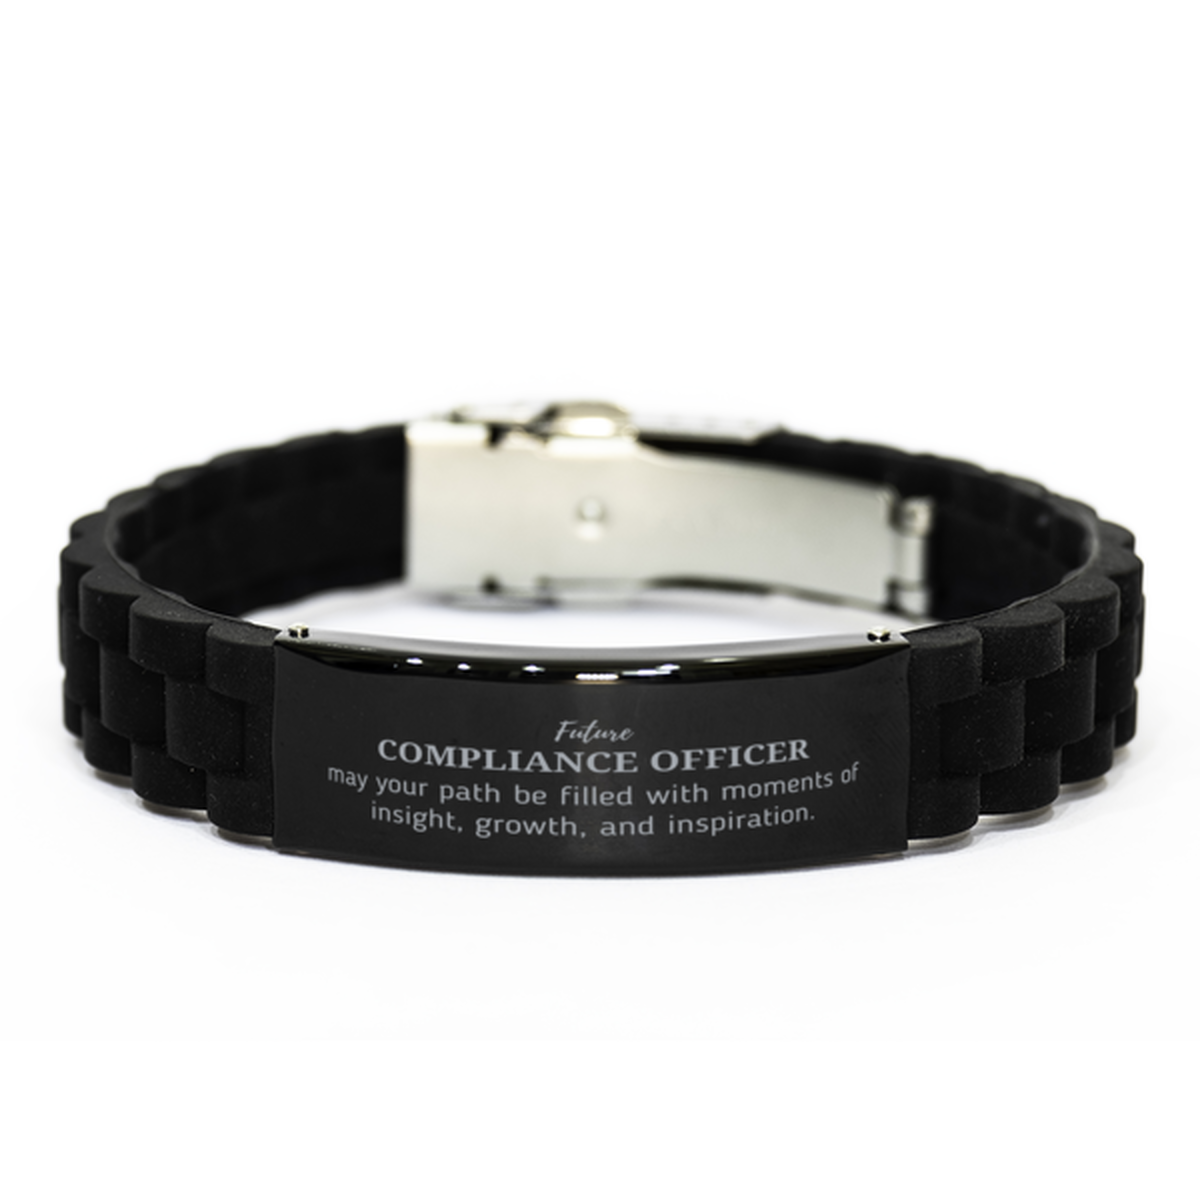 Future Compliance Officer Gifts, May your path be filled with moments of insight, Graduation Gifts for New Compliance Officer, Christmas Unique Black Glidelock Clasp Bracelet For Men, Women, Friends